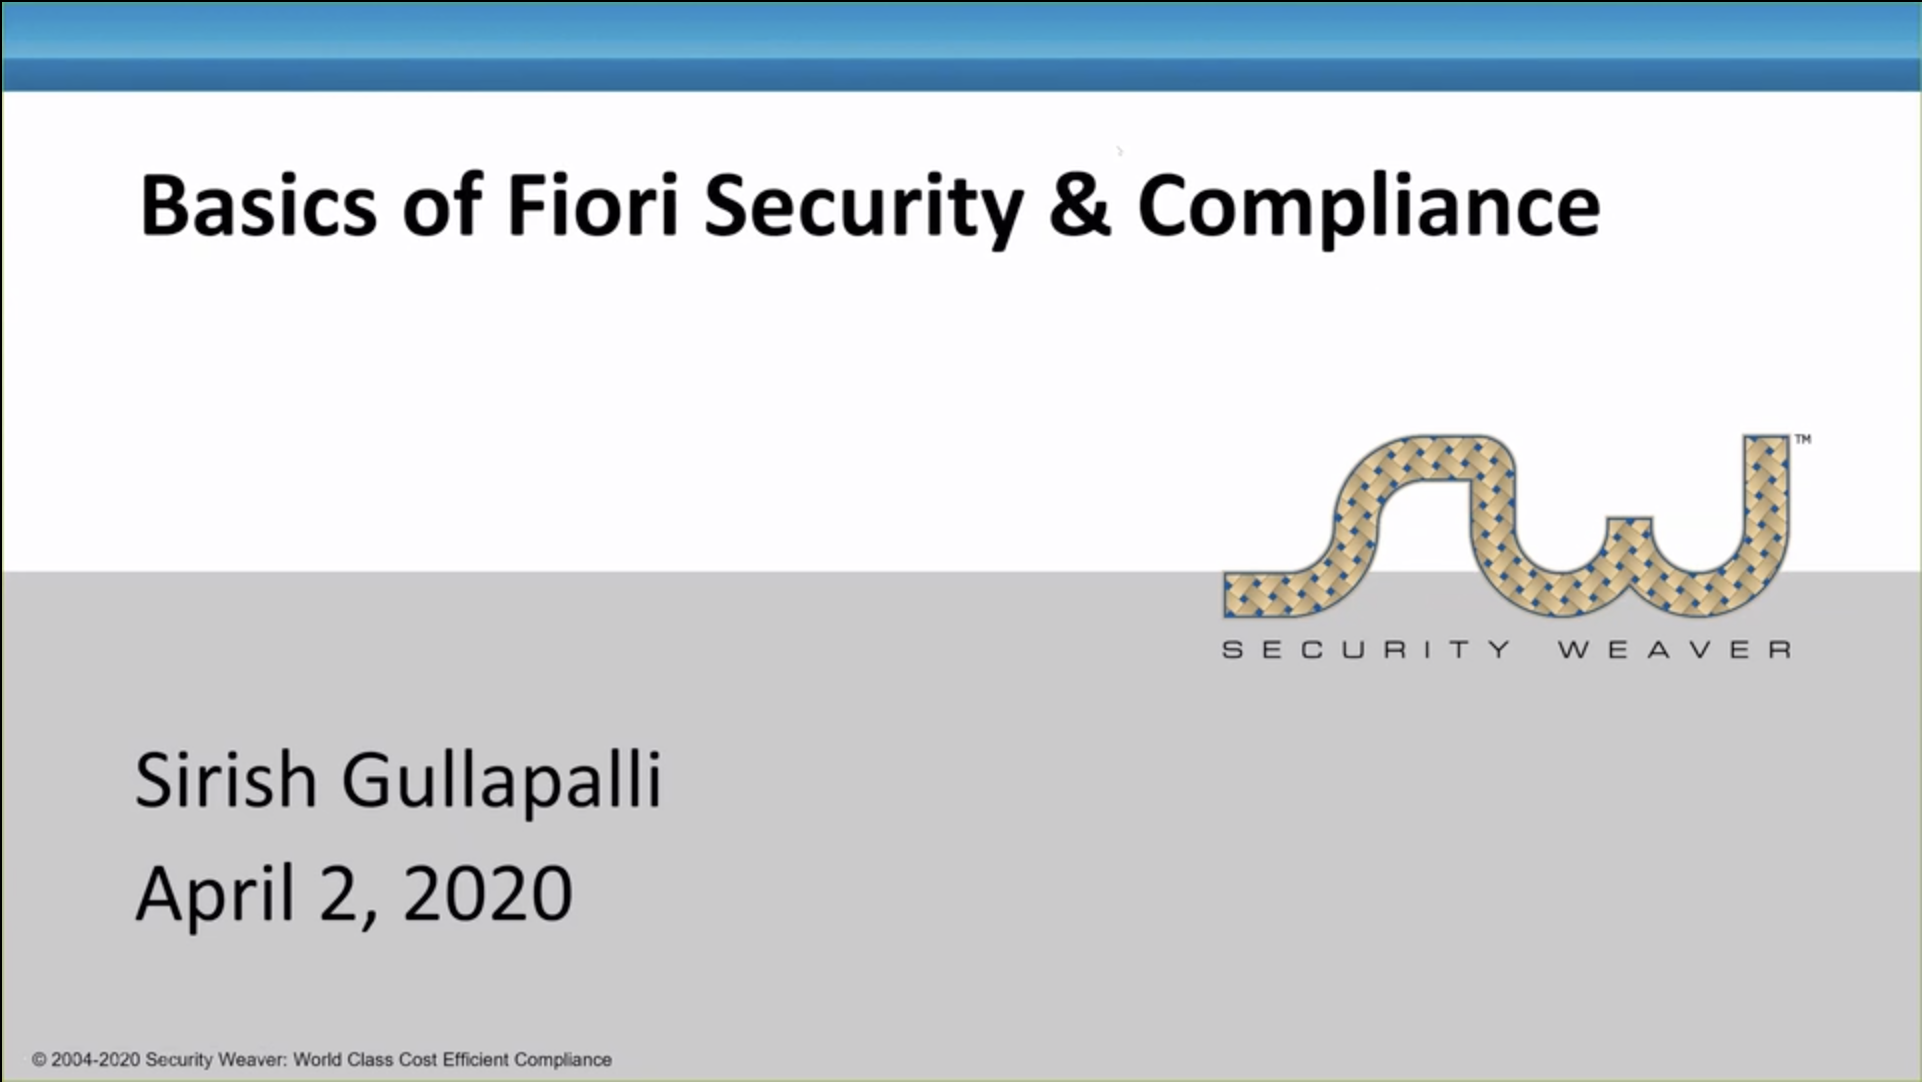 Basics of Fiori Security and Compliance Webinar Introduction image